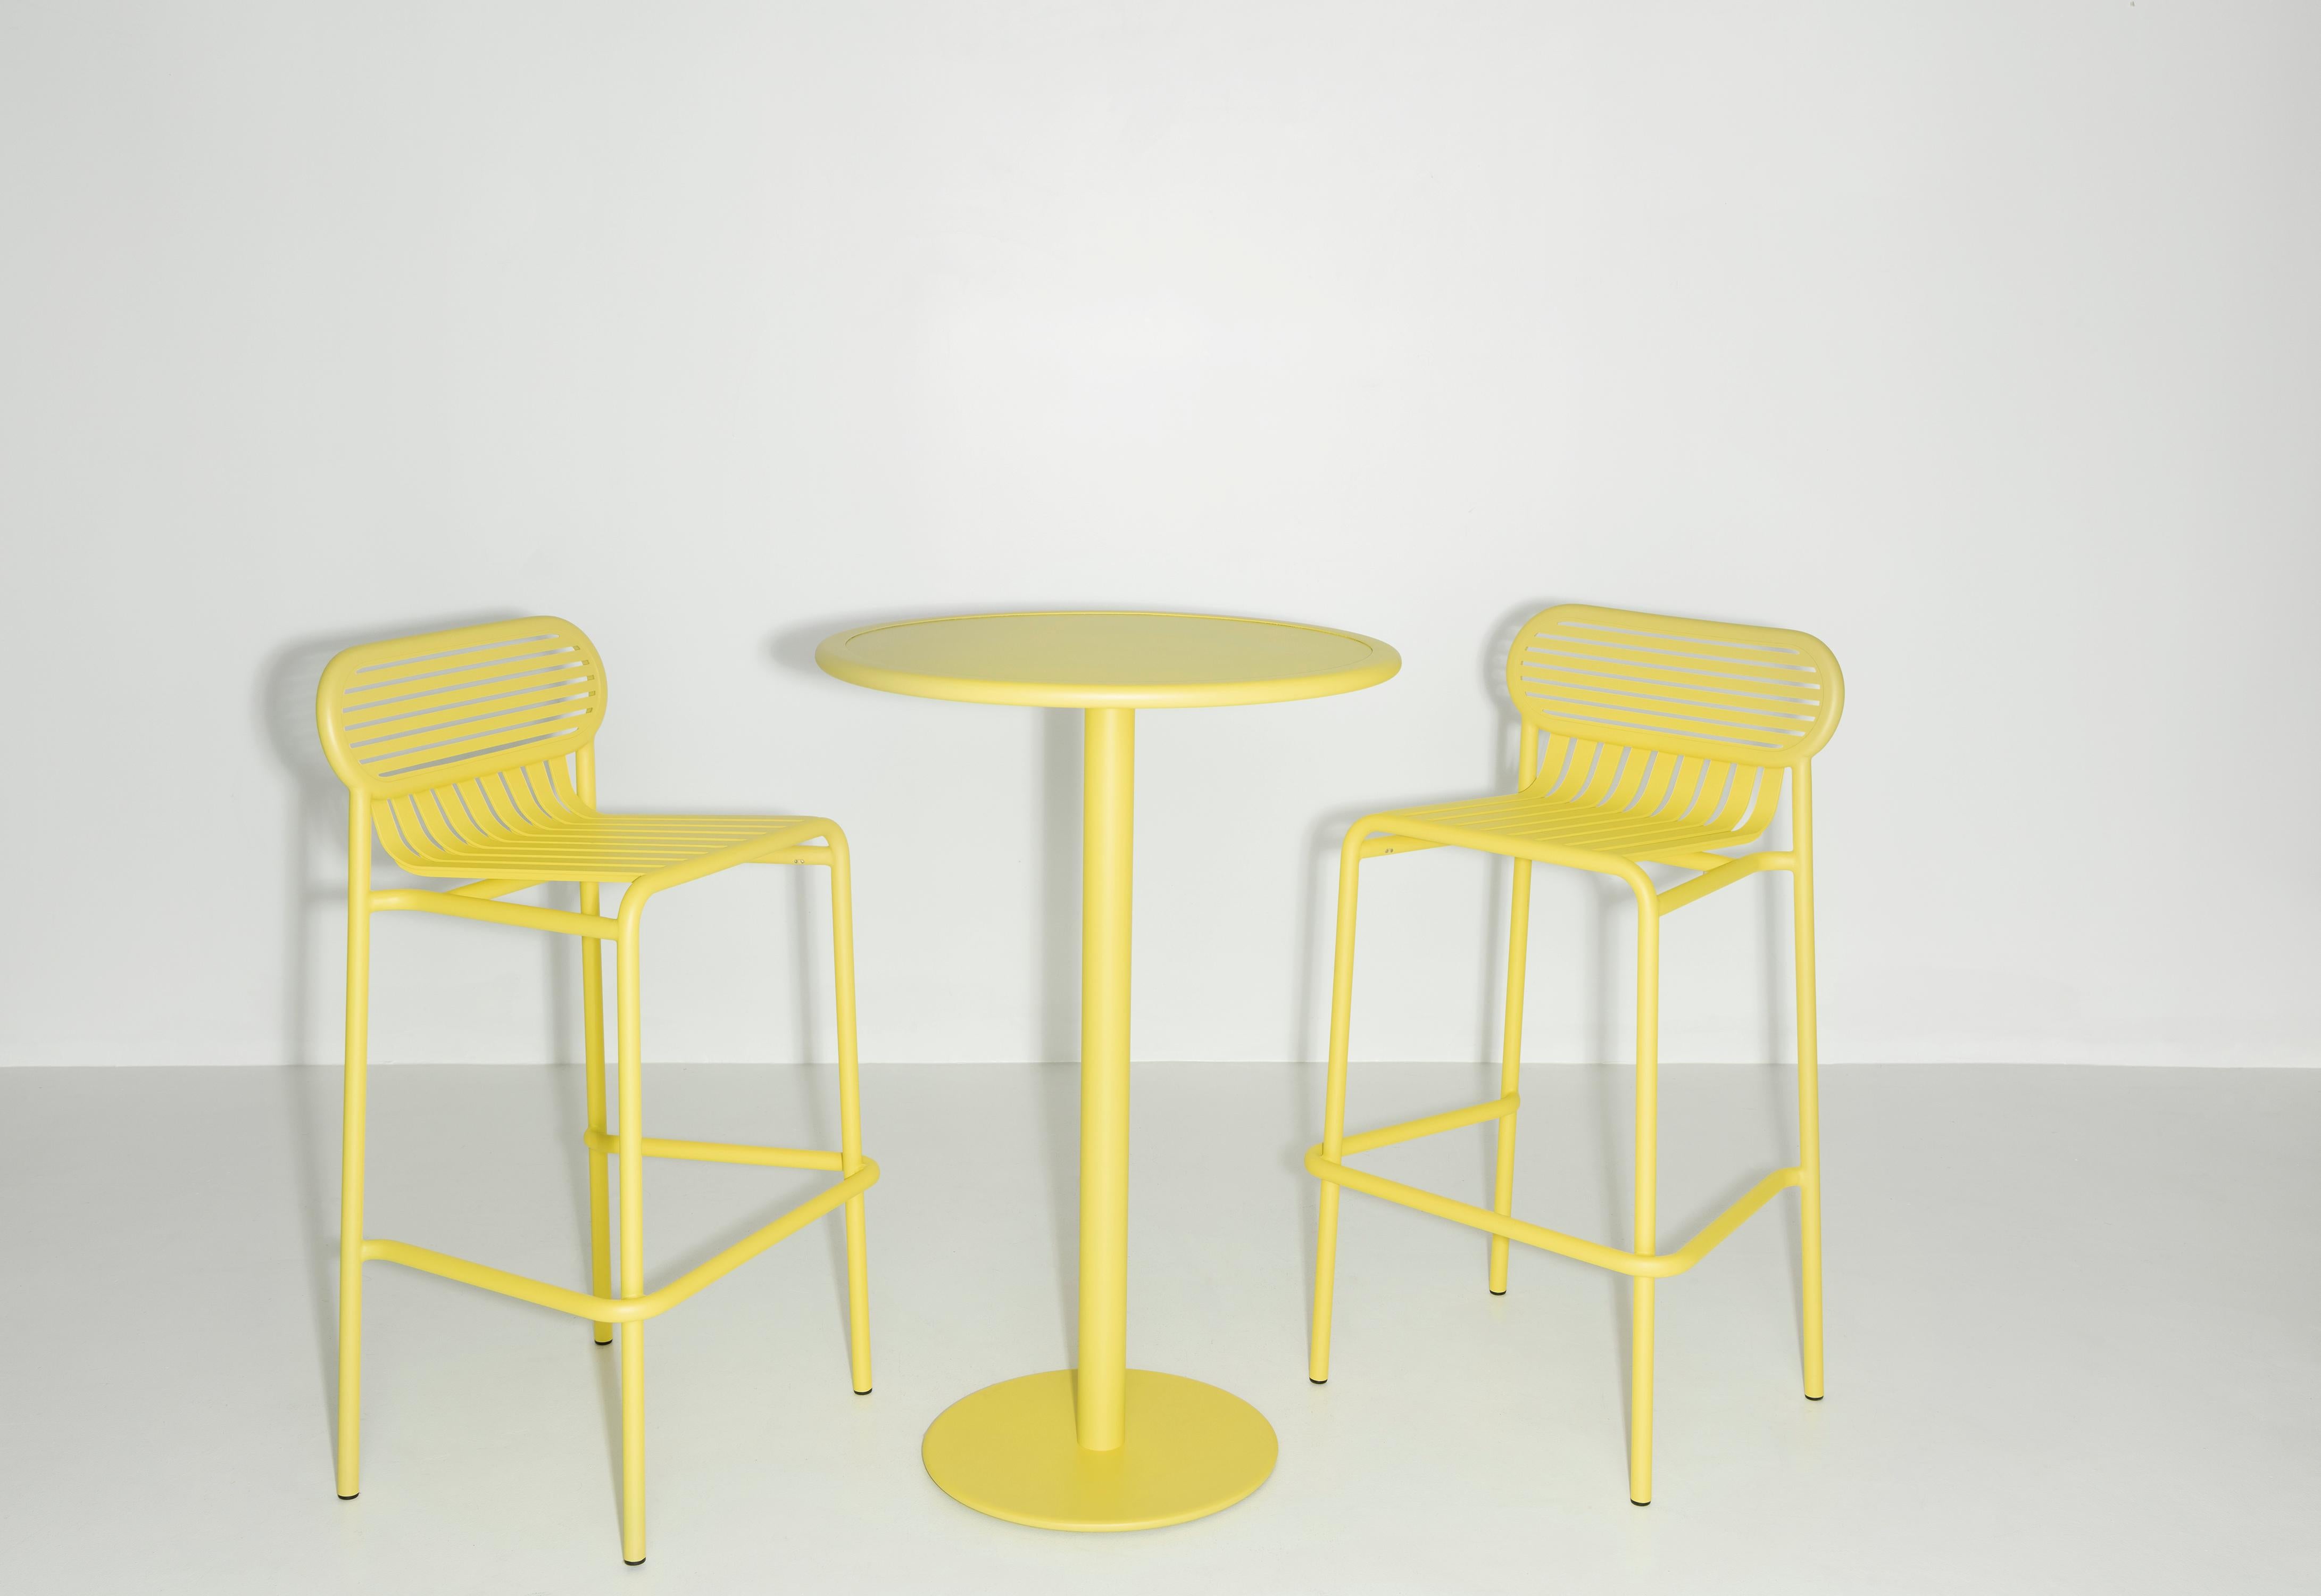 Petite Friture Week-End Round High Table in Yellow Aluminium, 2017 In New Condition For Sale In Brooklyn, NY